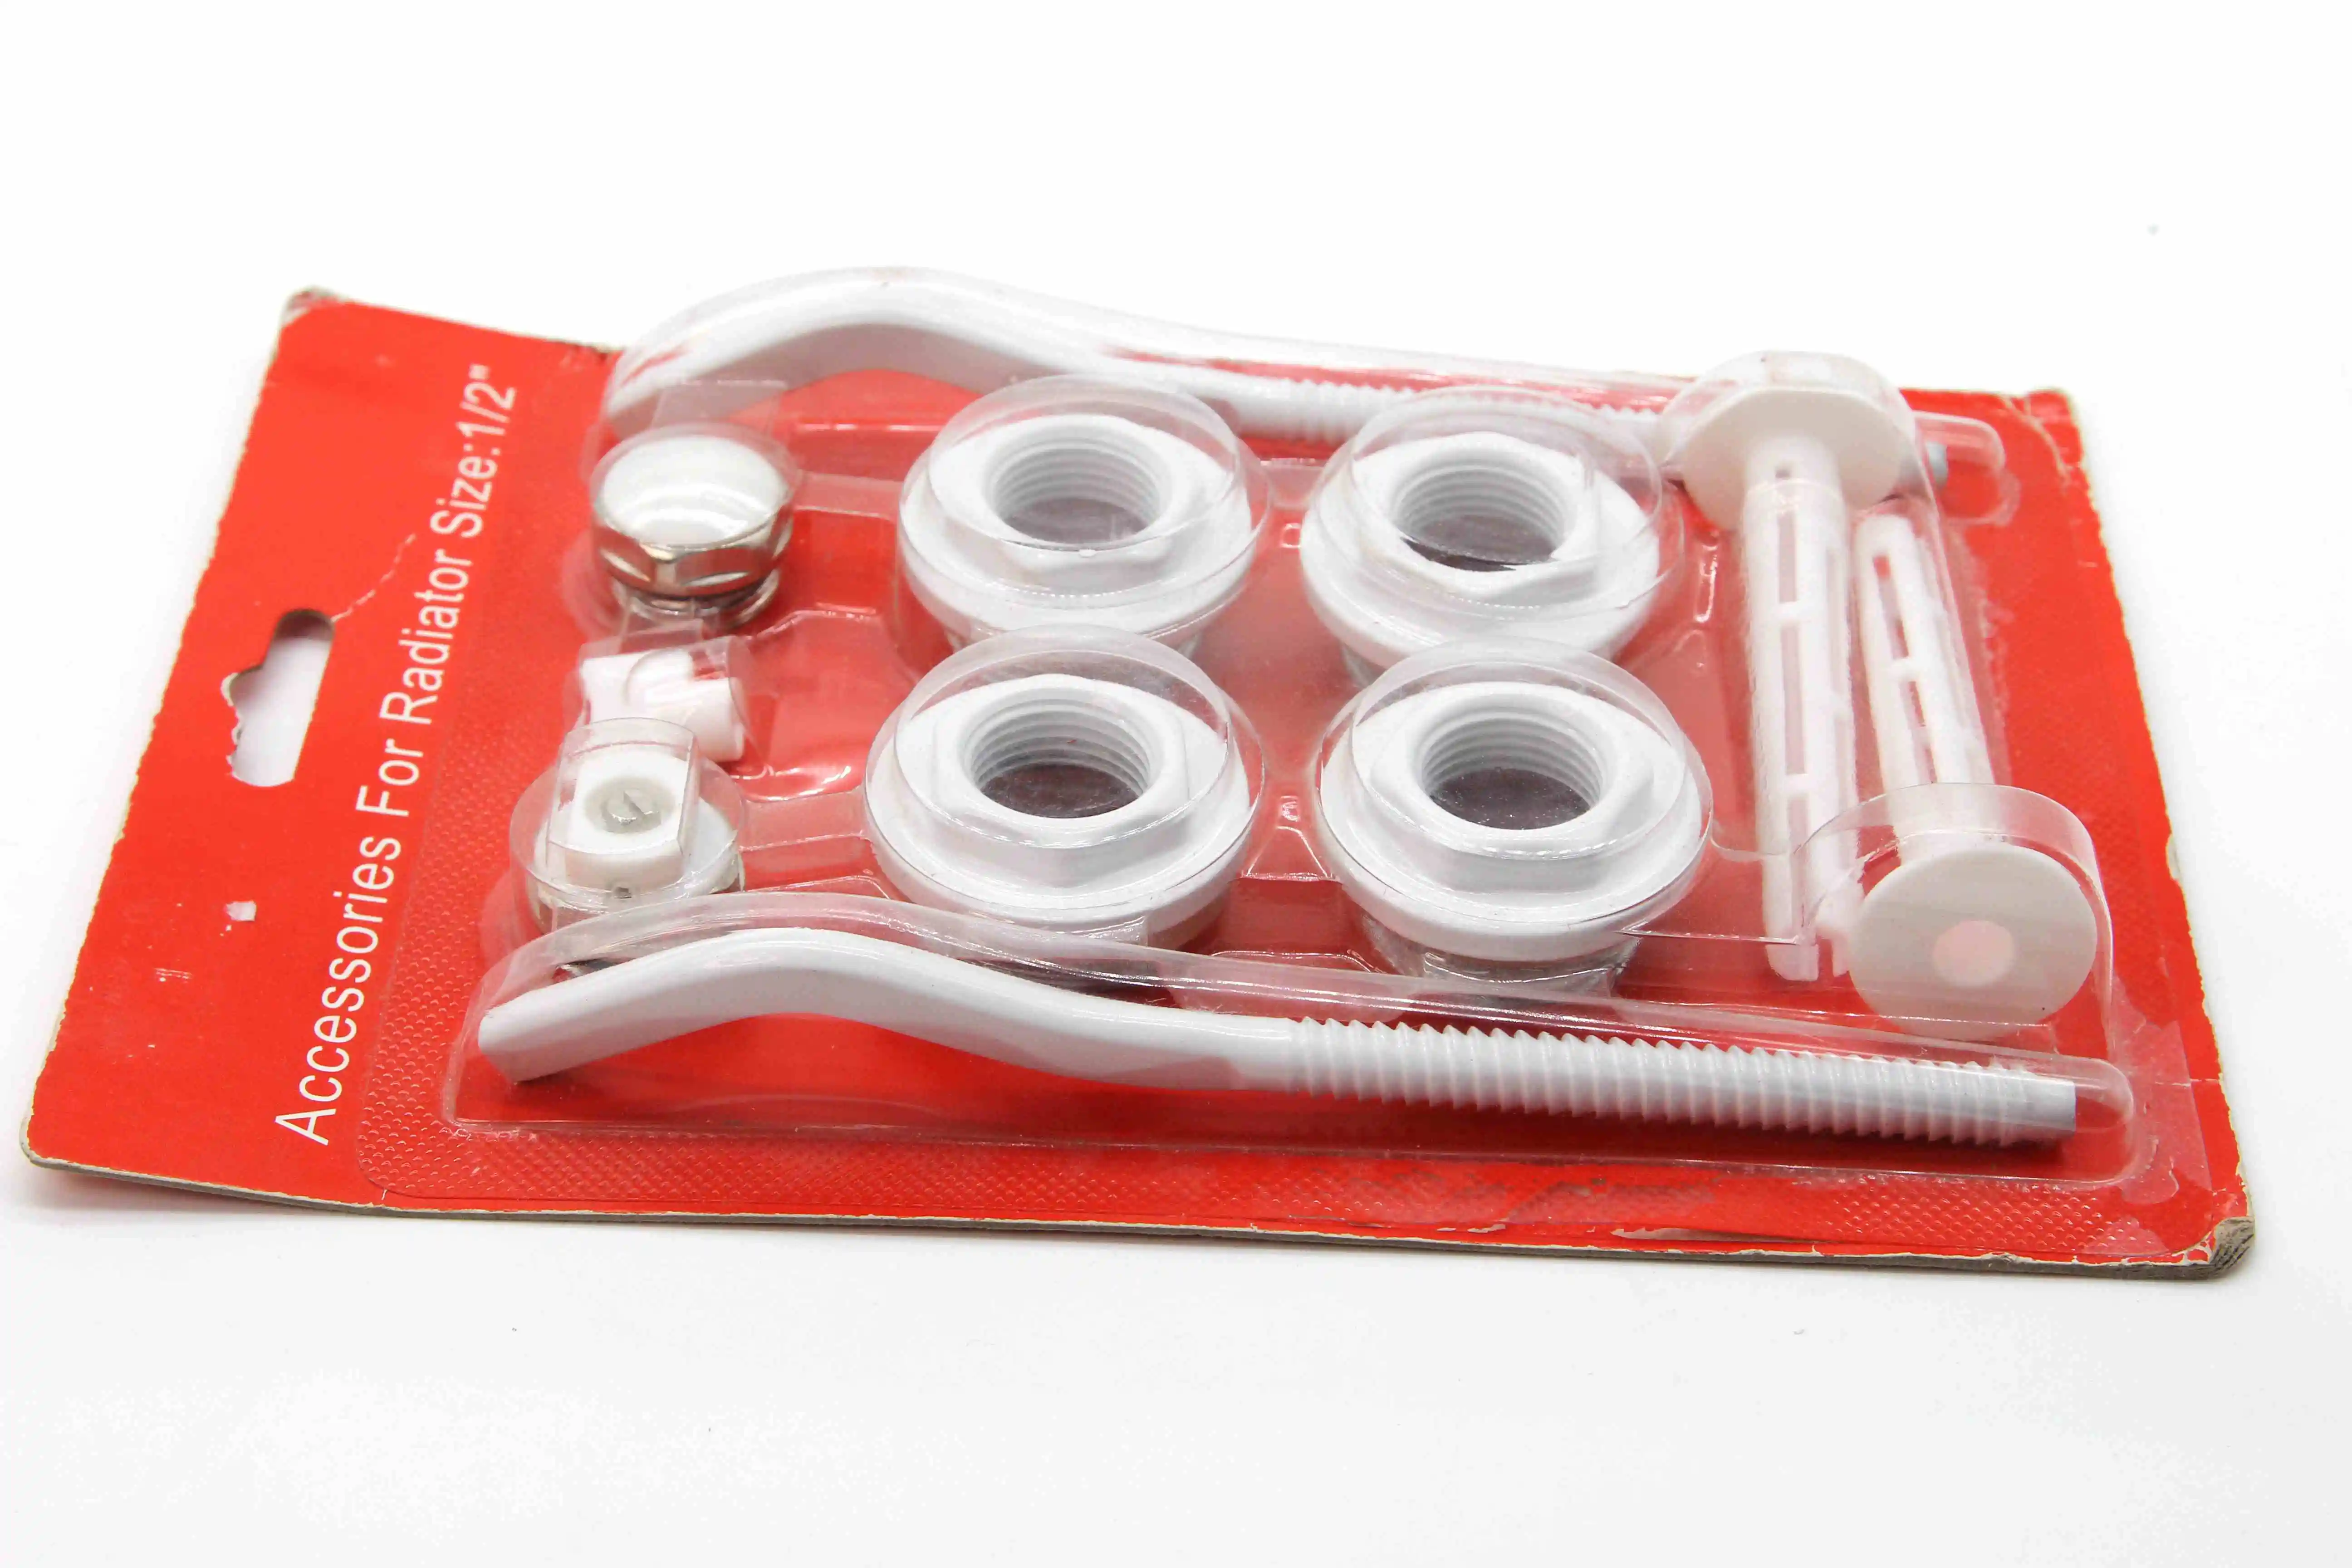 11 Elements House Radiator Accessories Heating Radiator Fitting Radiator Hose Set - Buy House Radiator Accessories,Aluminium Radiator Fitting,Radiator Hose Fittings Product on Alibaba.com